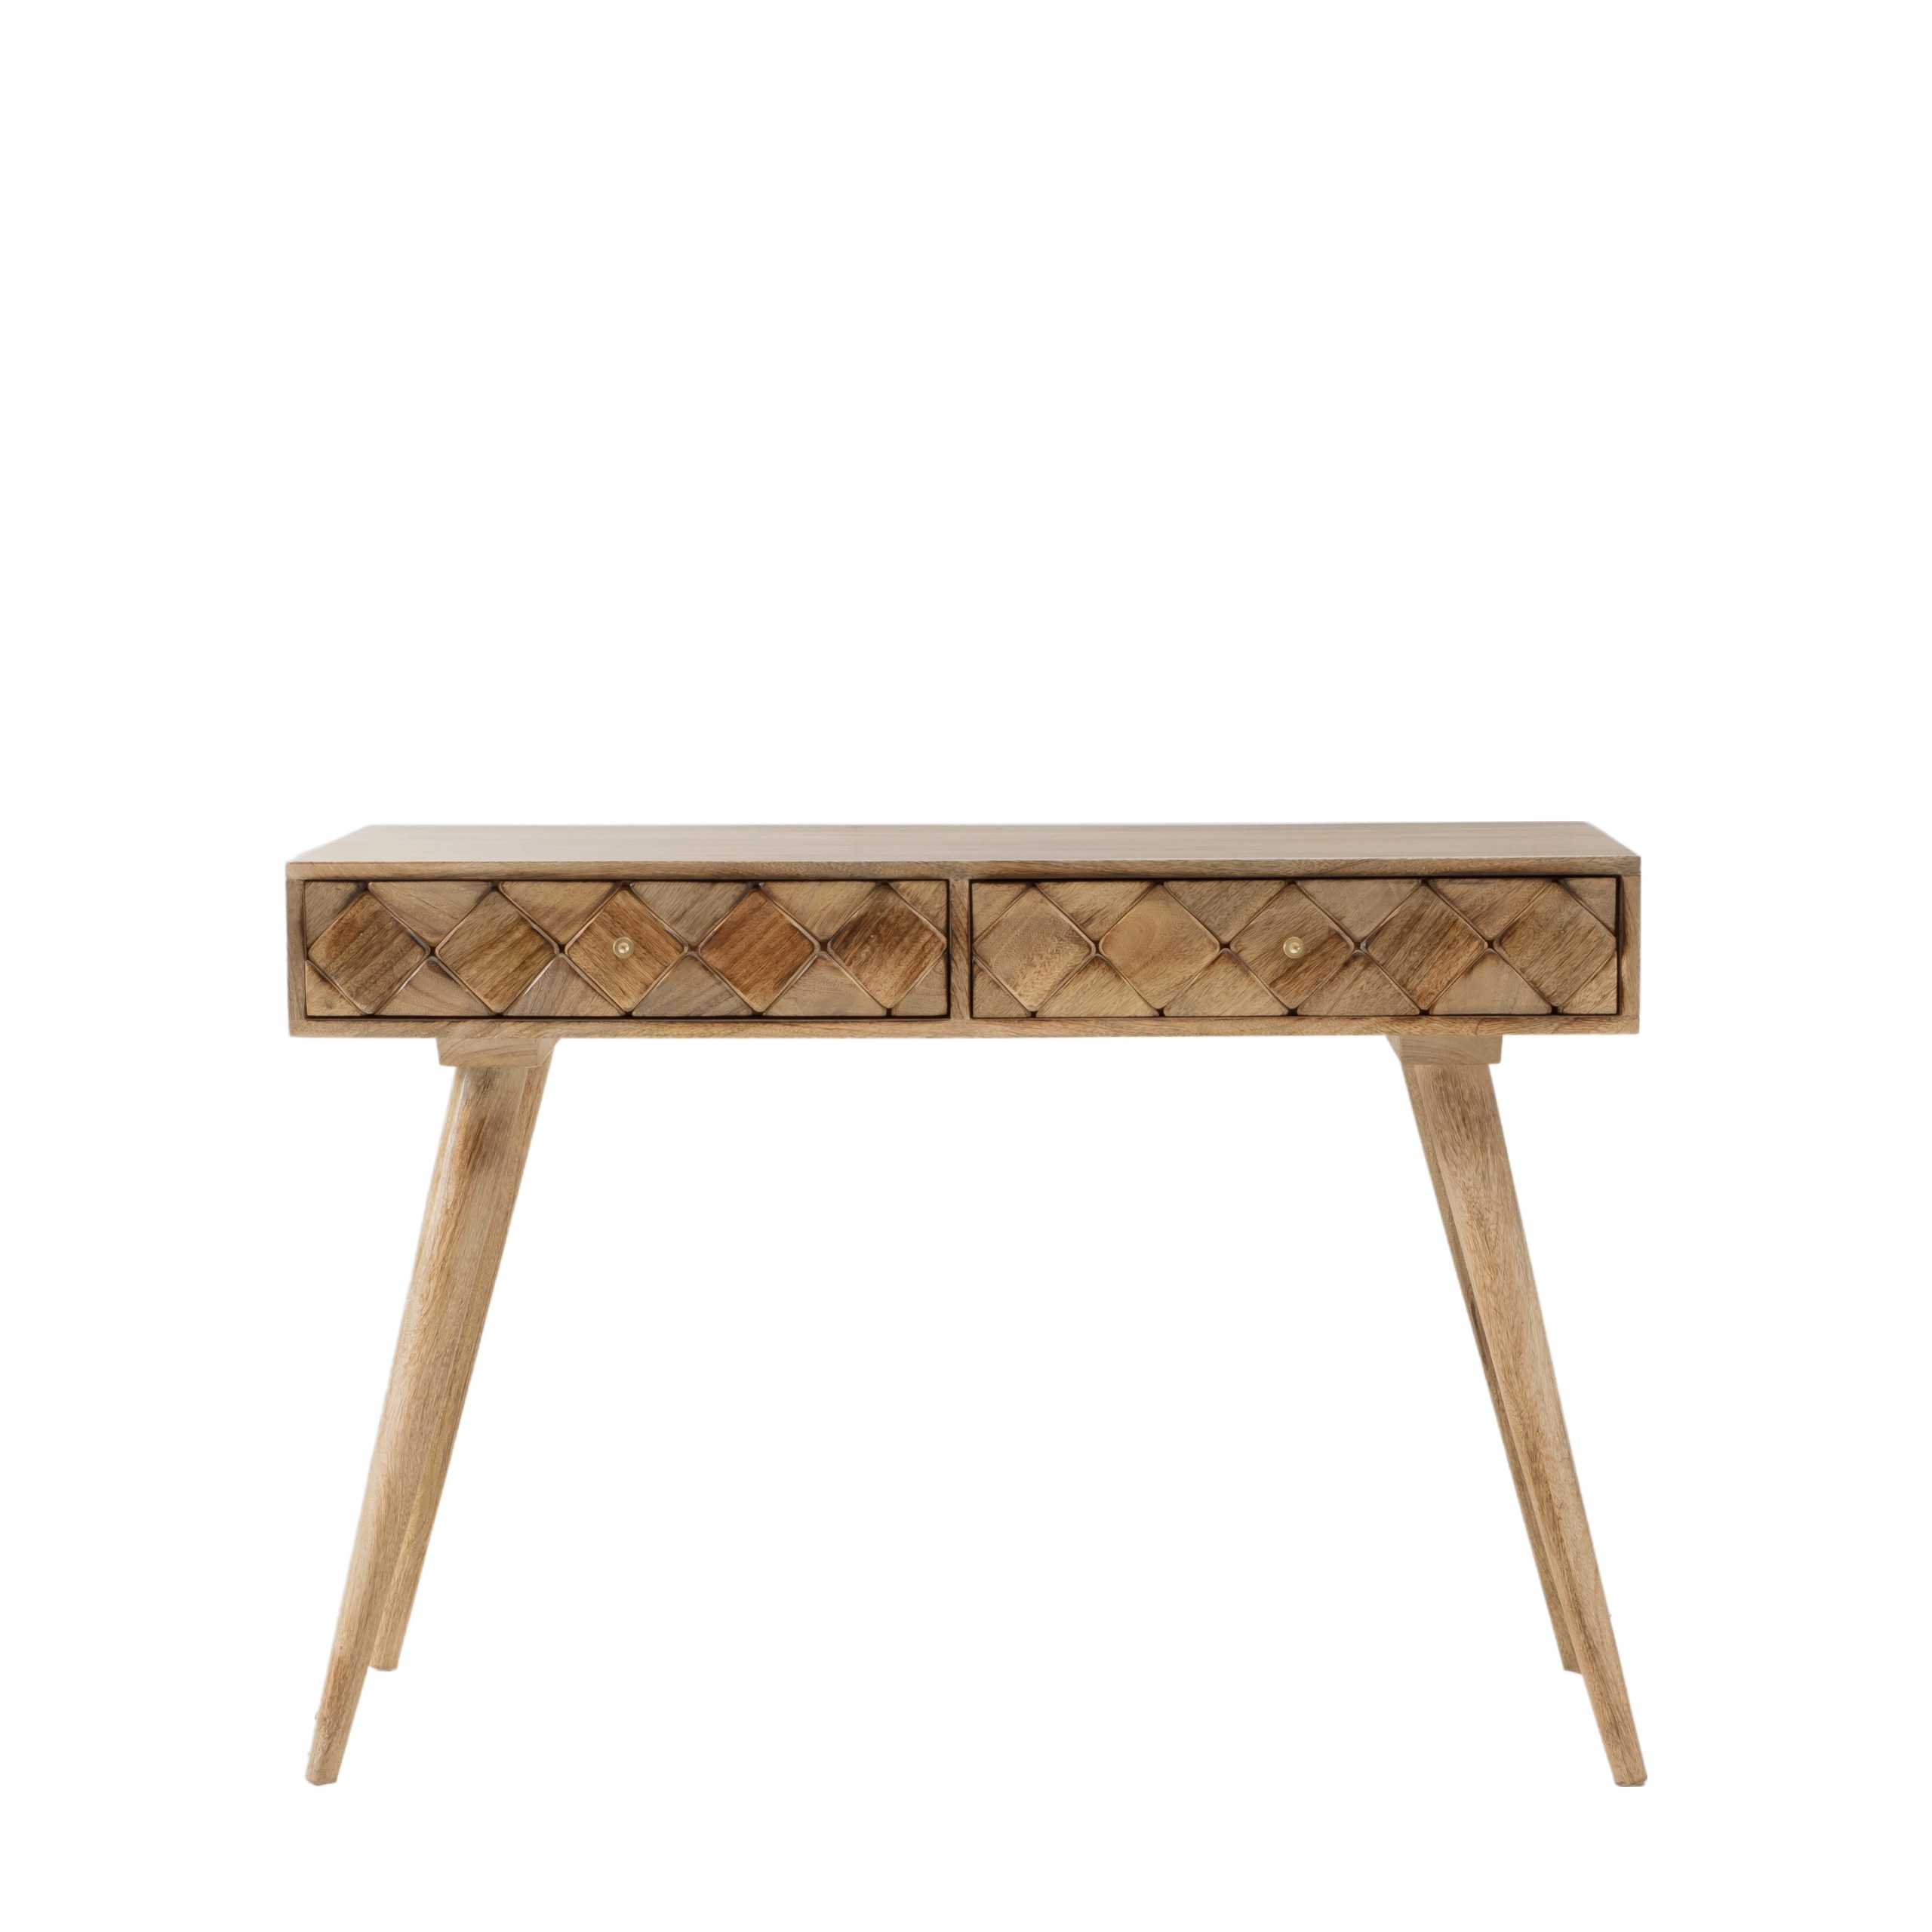 Gallery Direct Tuscany Console Table Burnt Wax